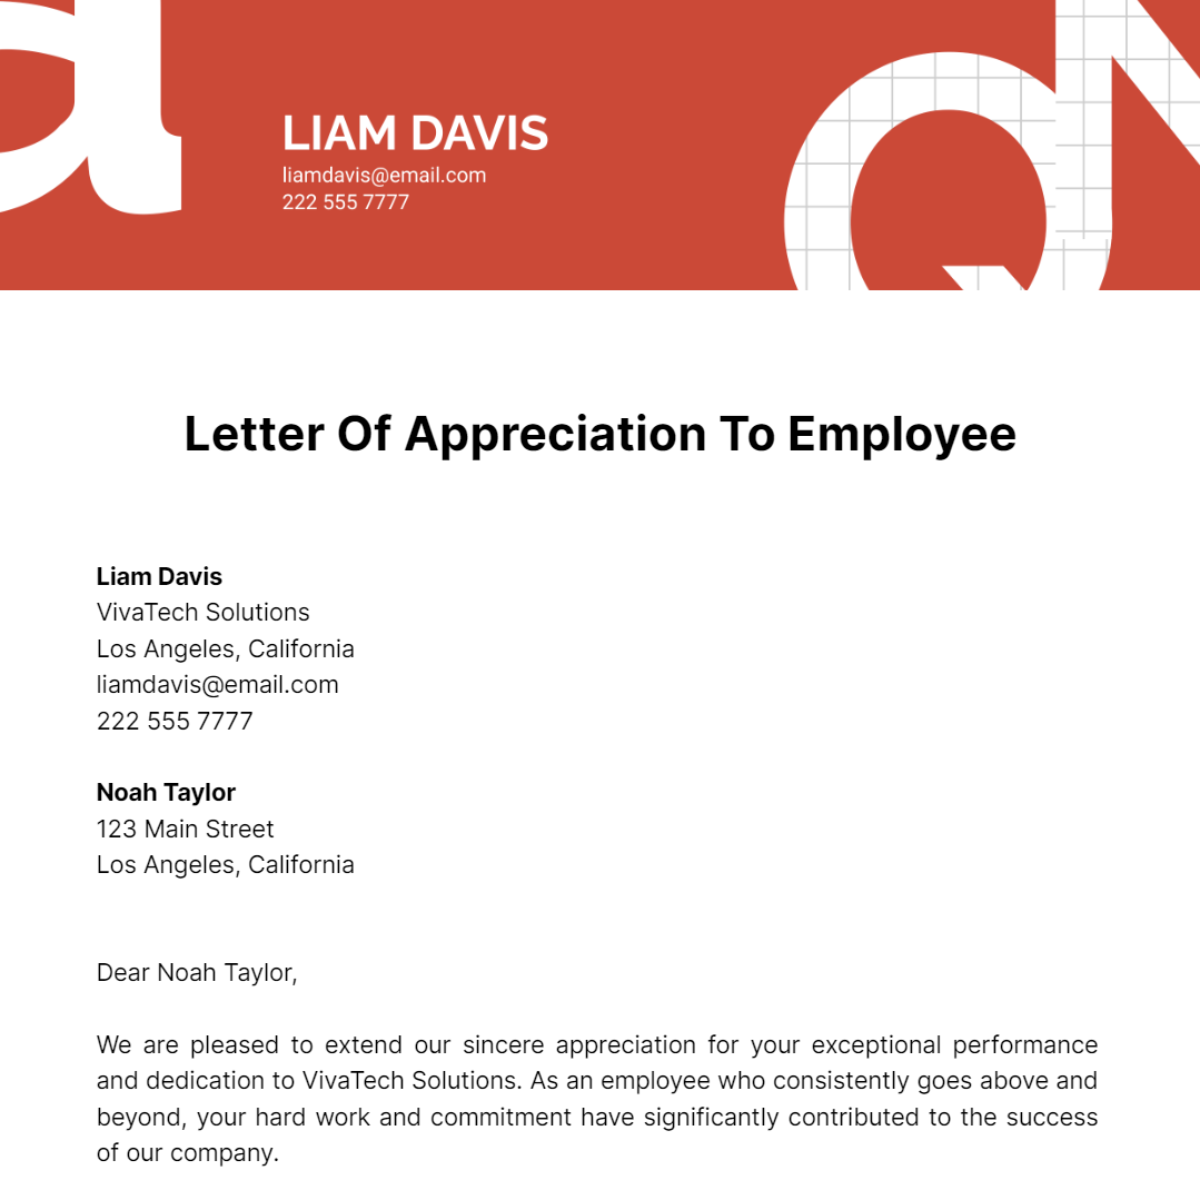 Letter of Appreciation To Employee Template